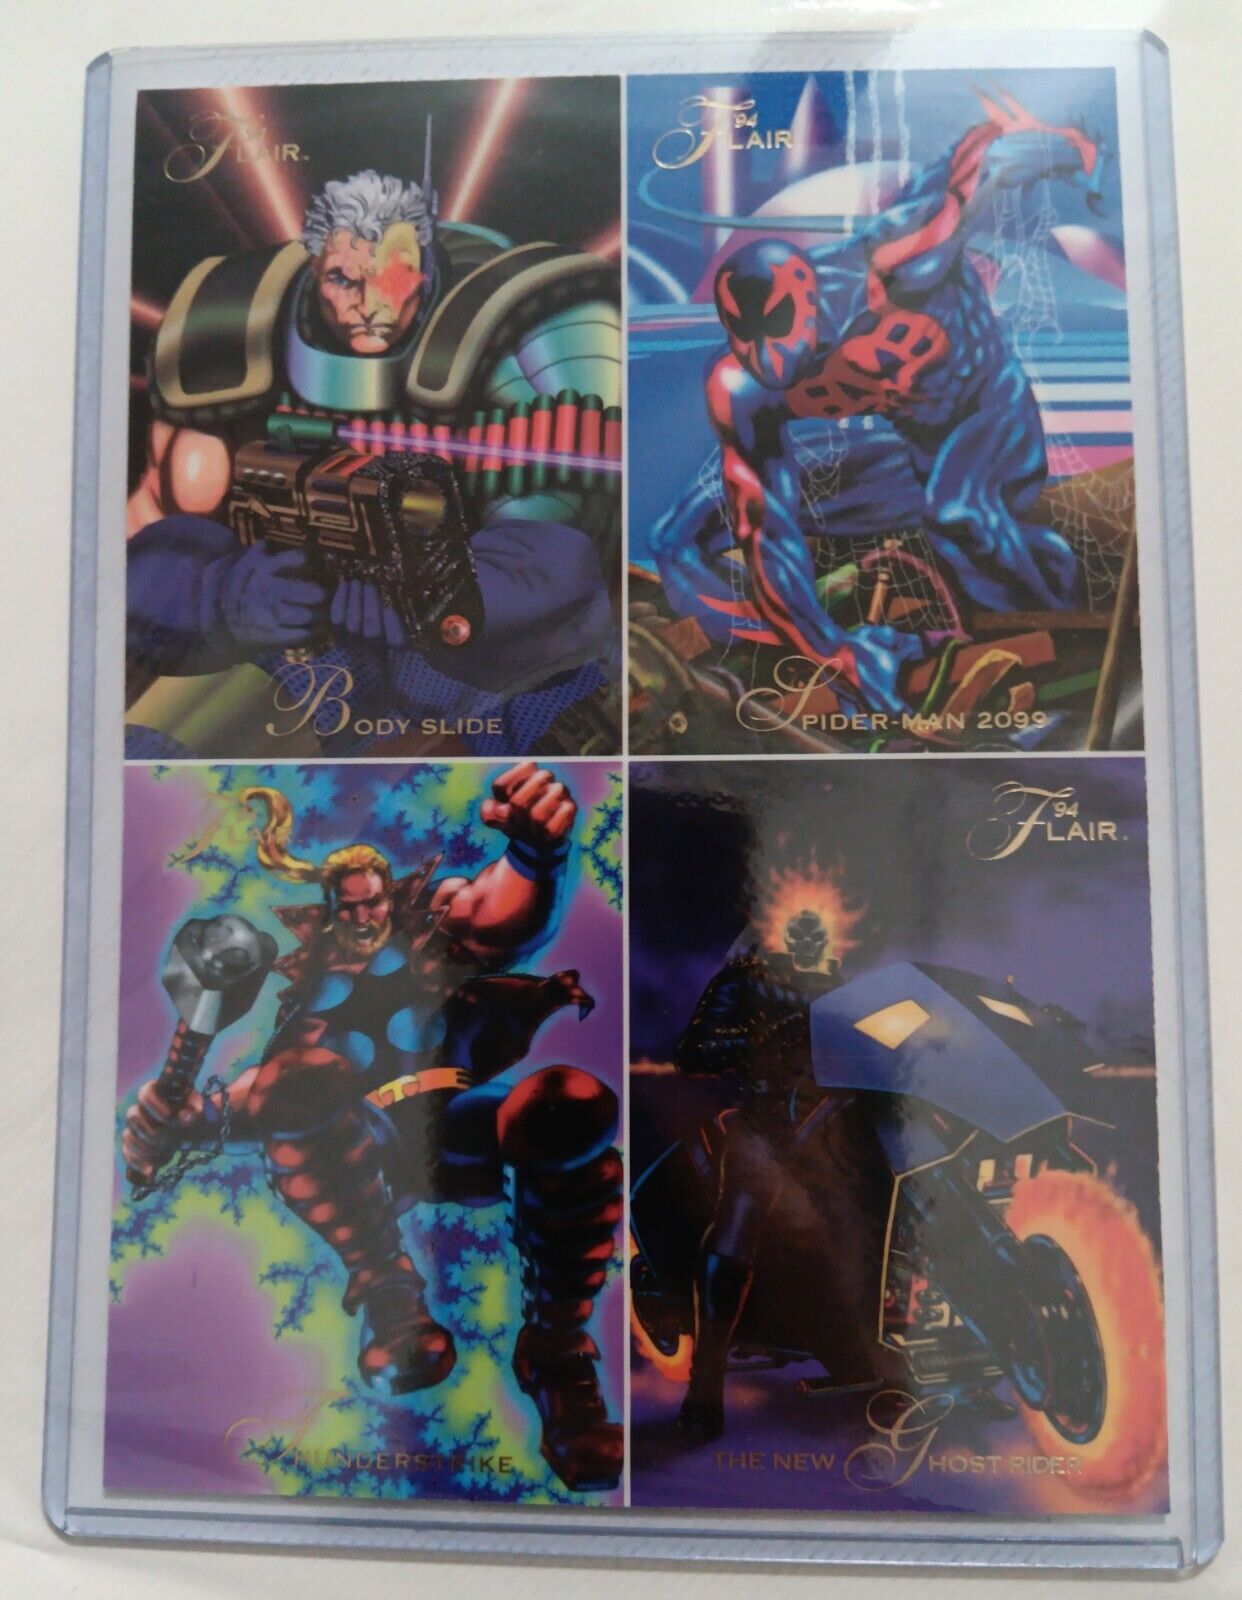 1994 Marvel Universe 1961-1993 Inaugural Edition Flair  Promotional Card Sleeved